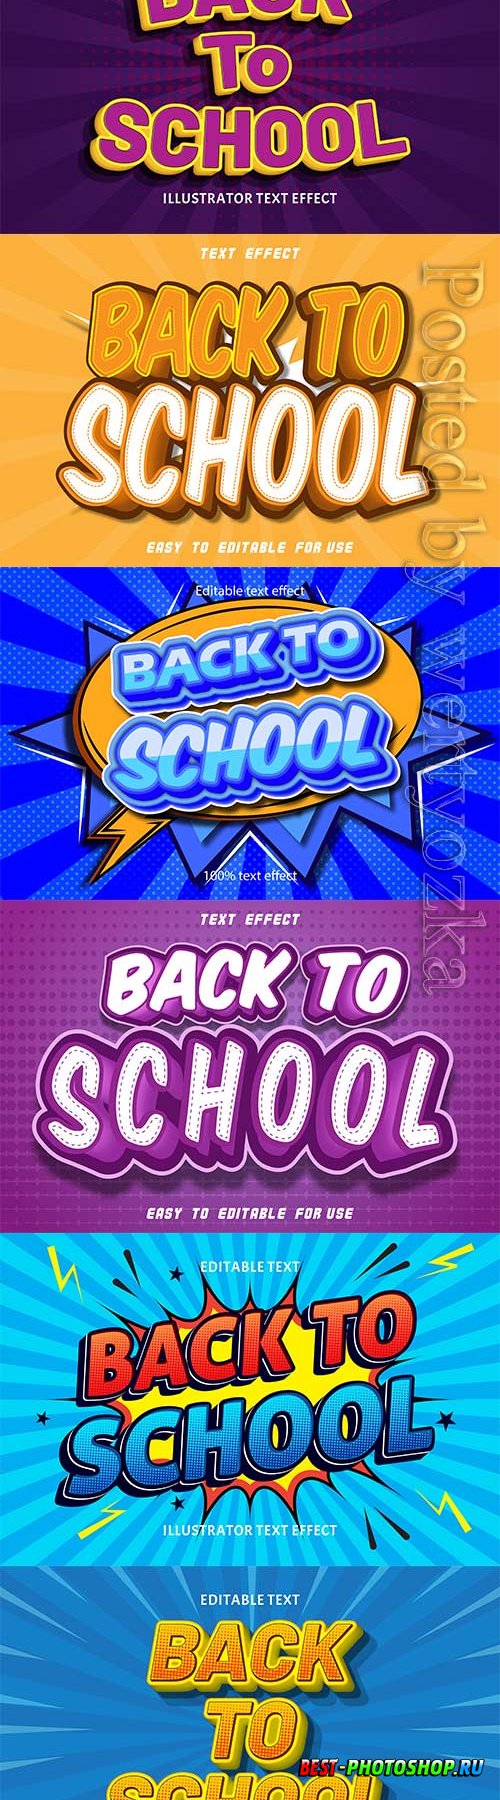 Back to school editable text effect vol 9